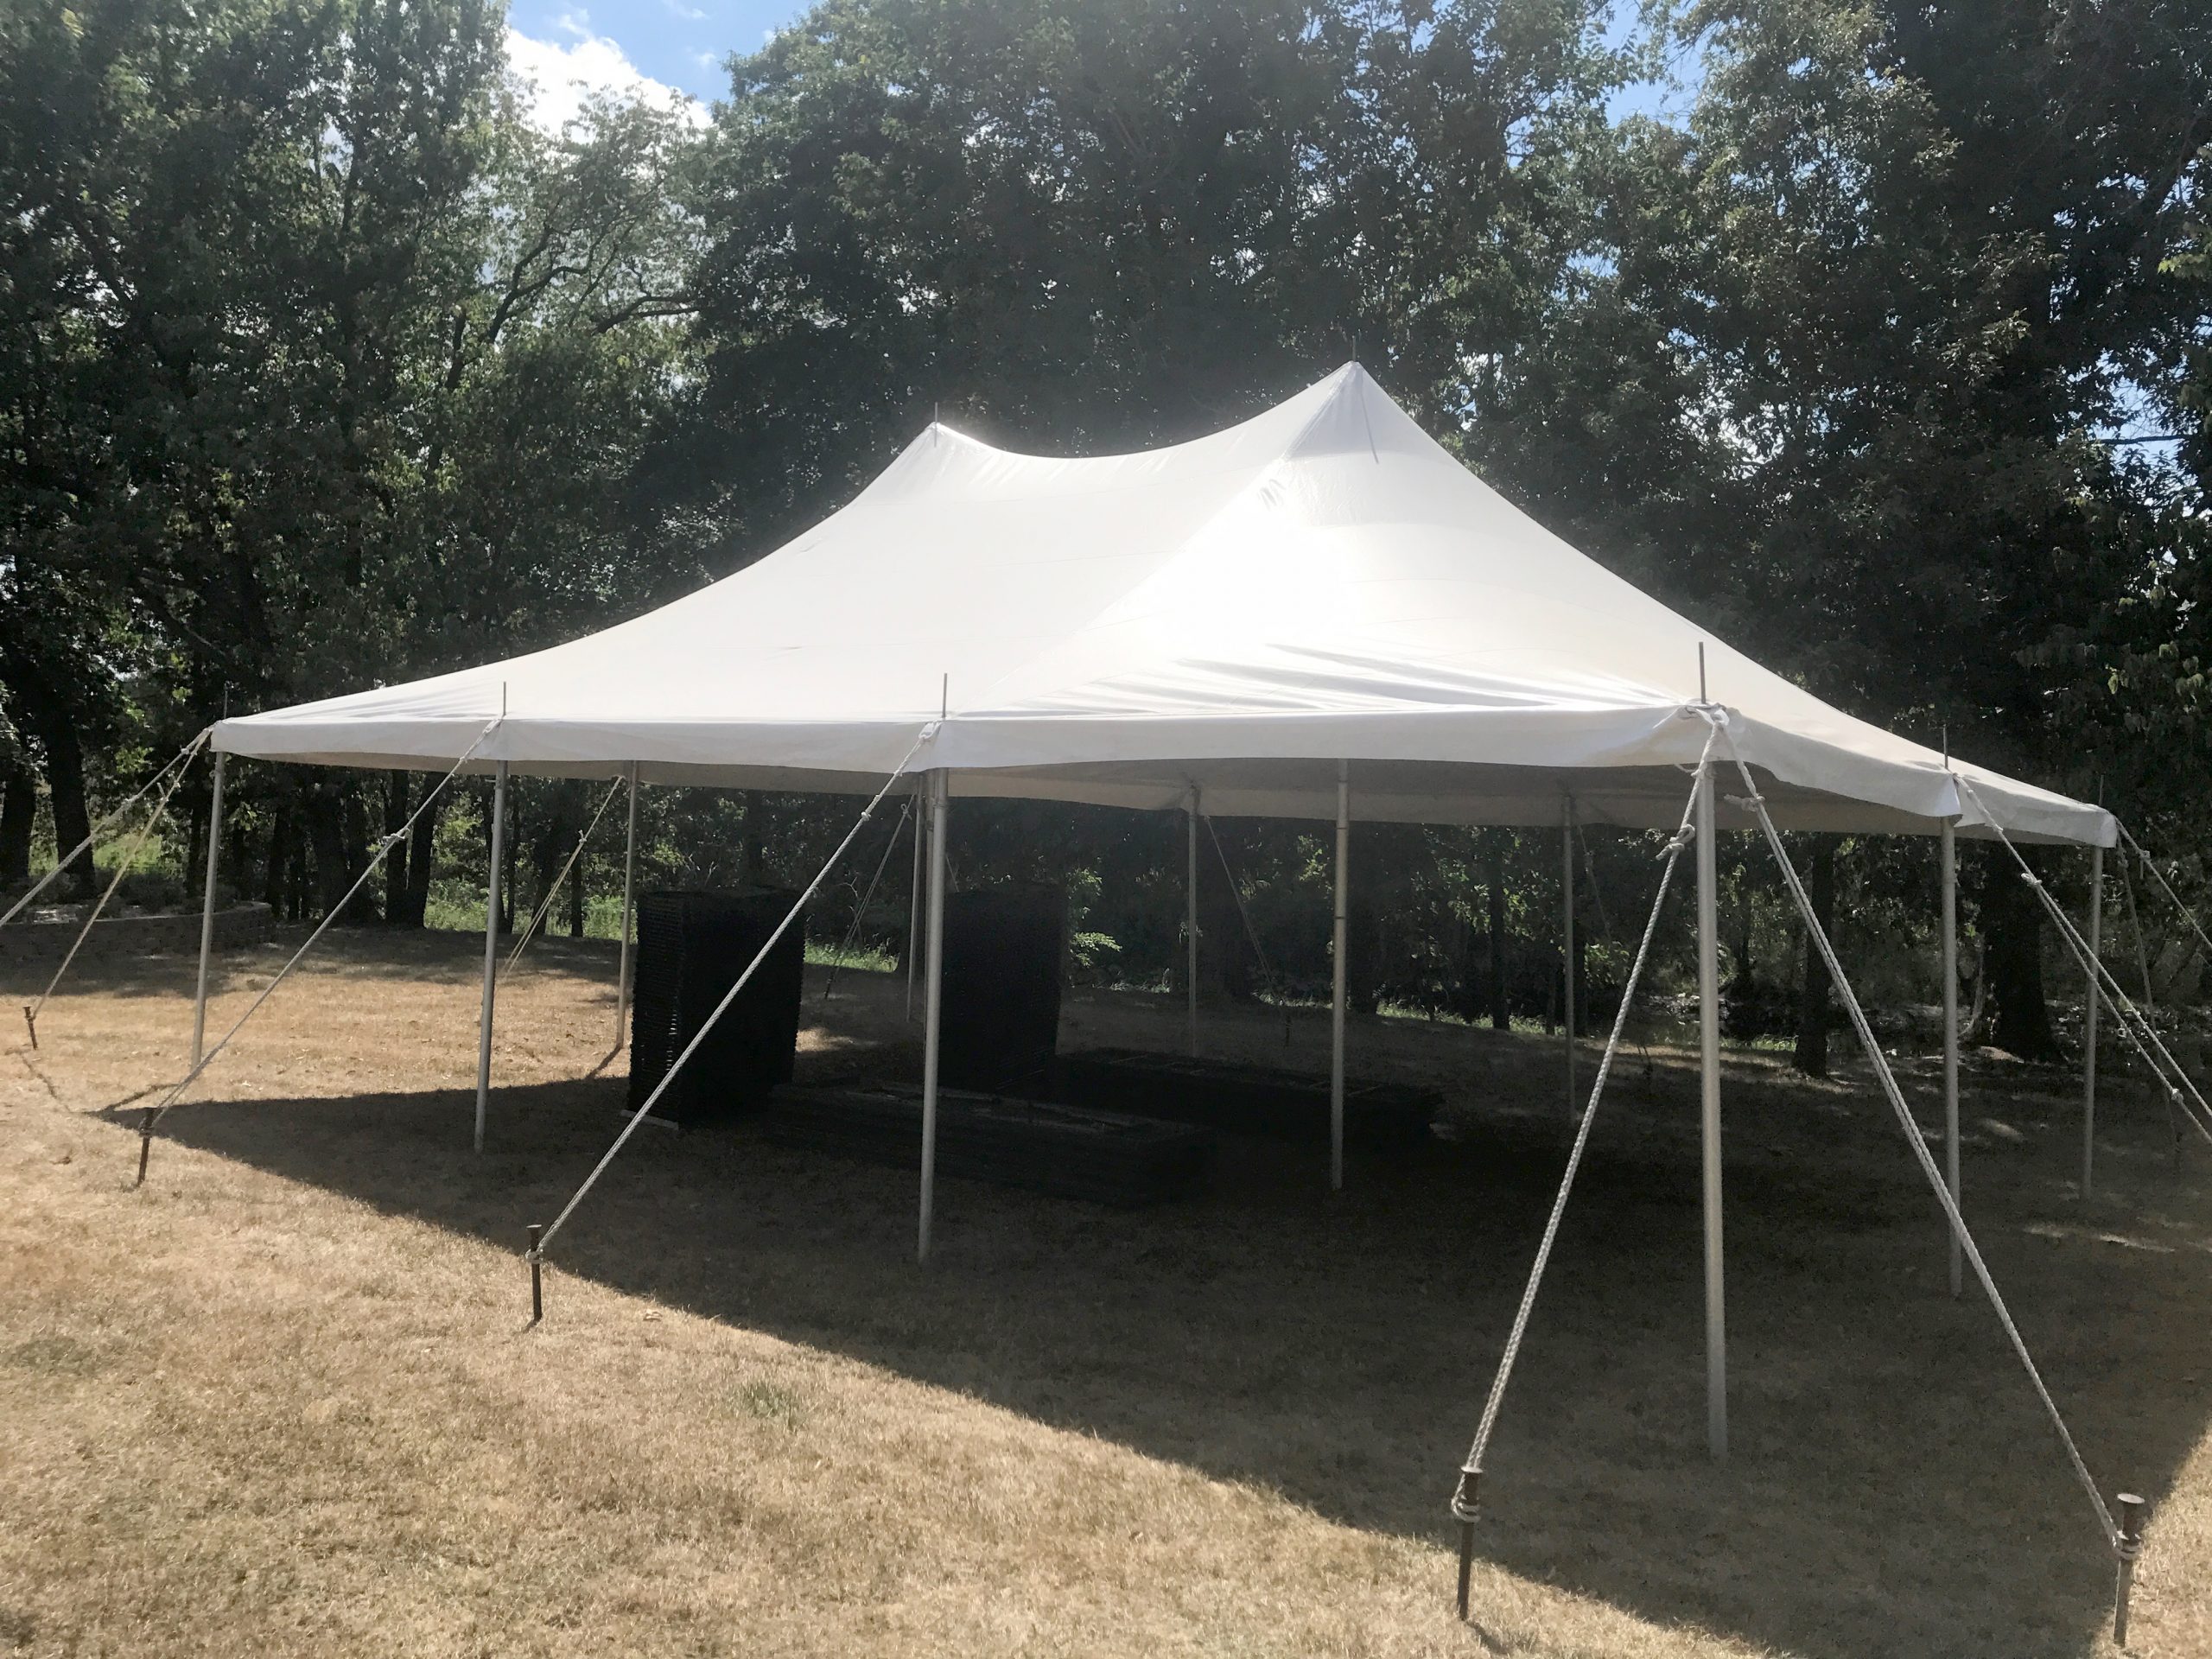 20' x 30' rope and pole tent for Outdoor corporate event setup for West Liberty foods in Libertyville, Iowa